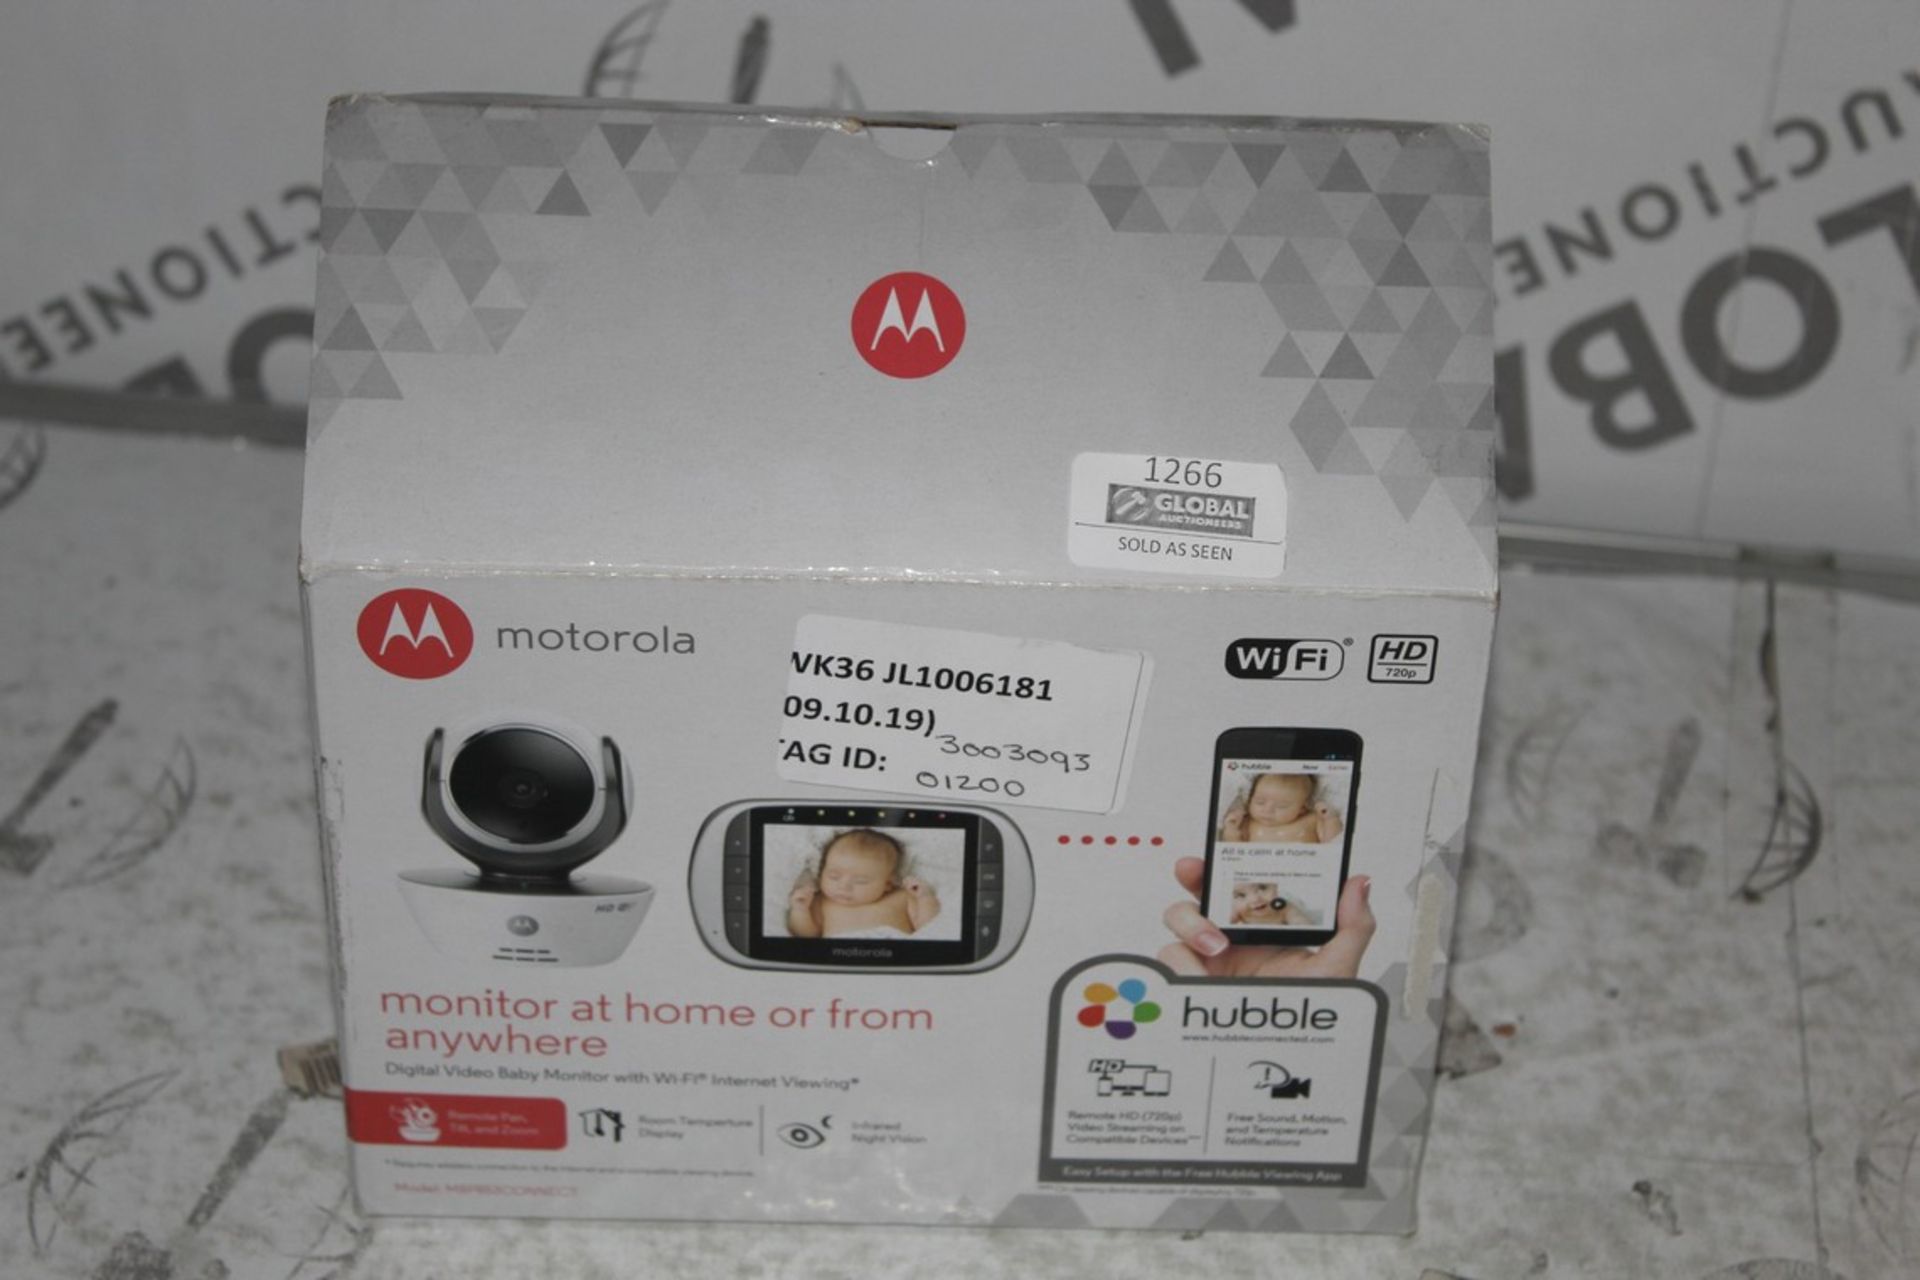 Boxed Motorola Hubble WIFI HD Video Baby Monitor Set RRP £120 (3003093) (Public Viewing and